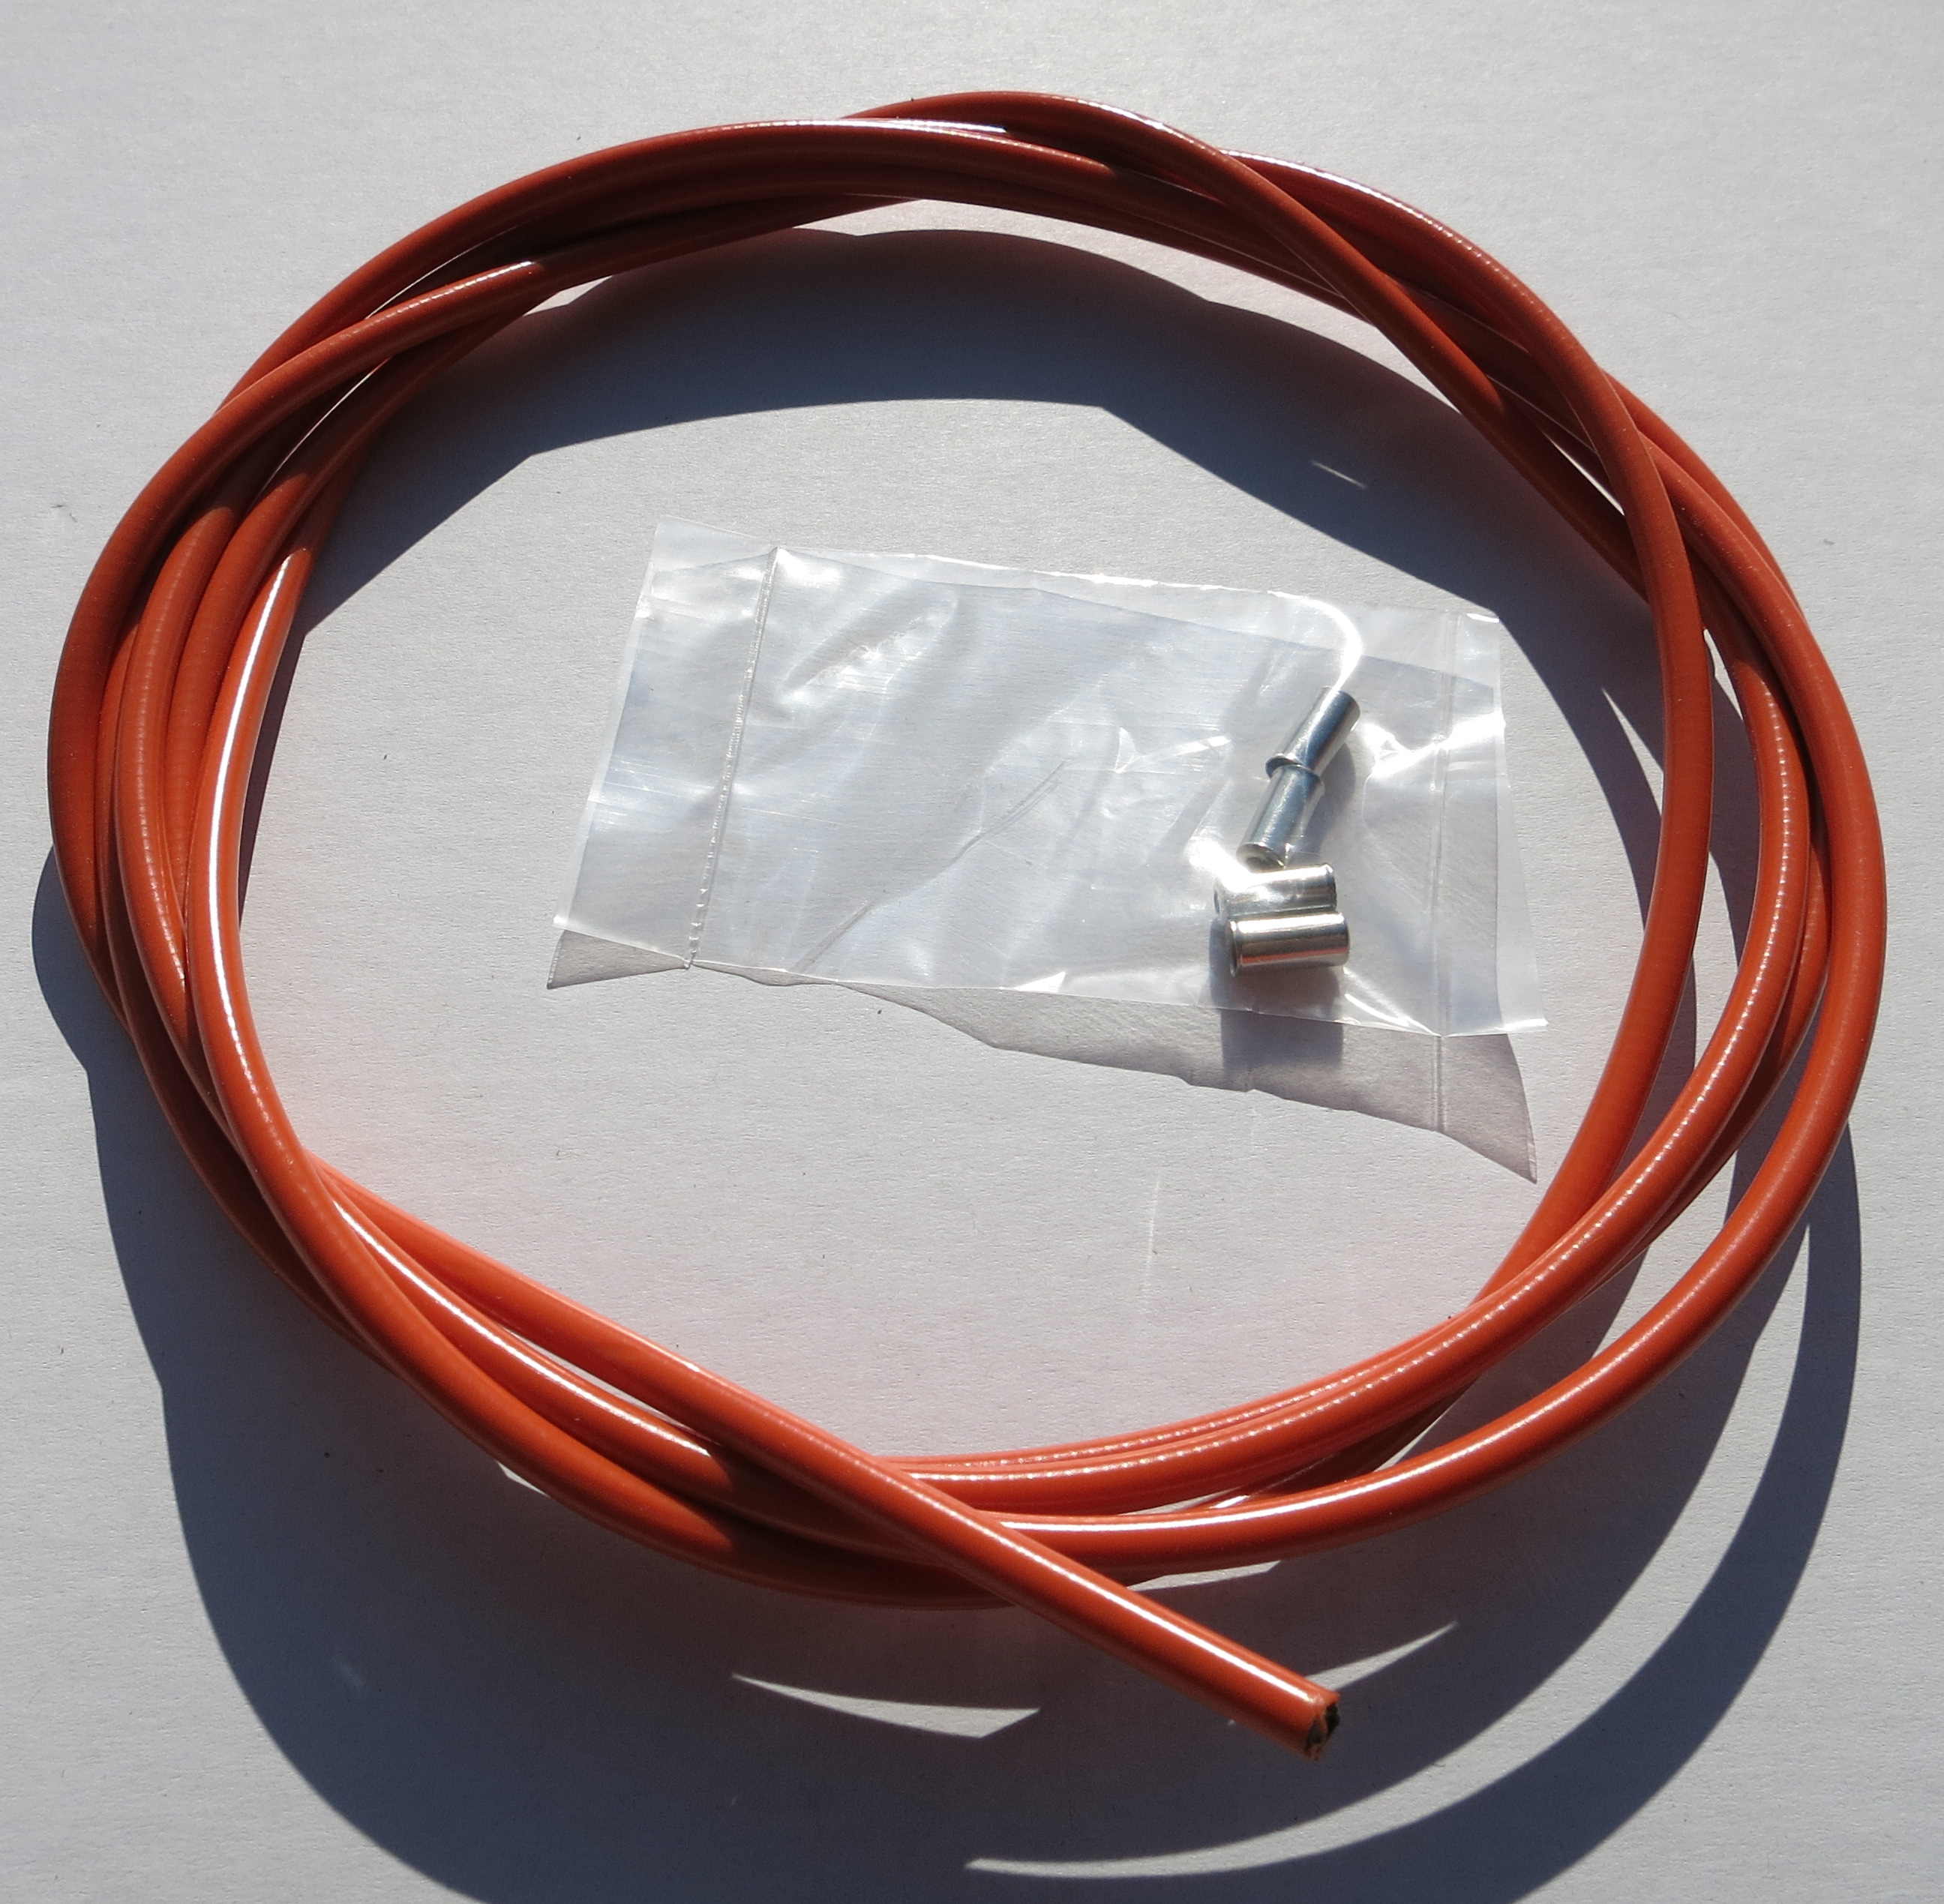 Outer Cable Housing Orange 2,50 m 5 mm